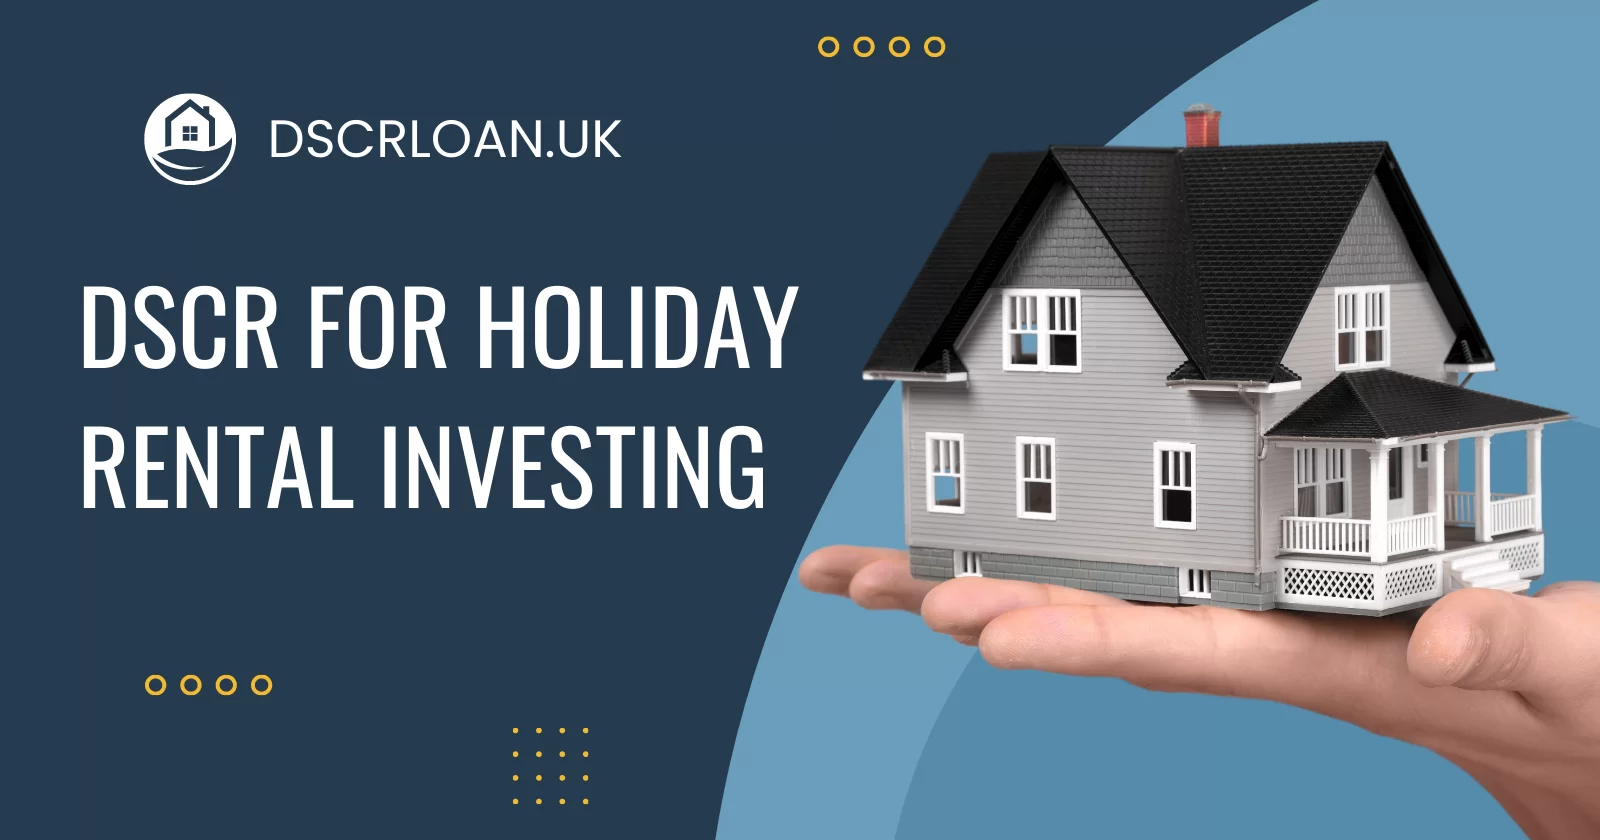 investing in holiday rentals with dscr